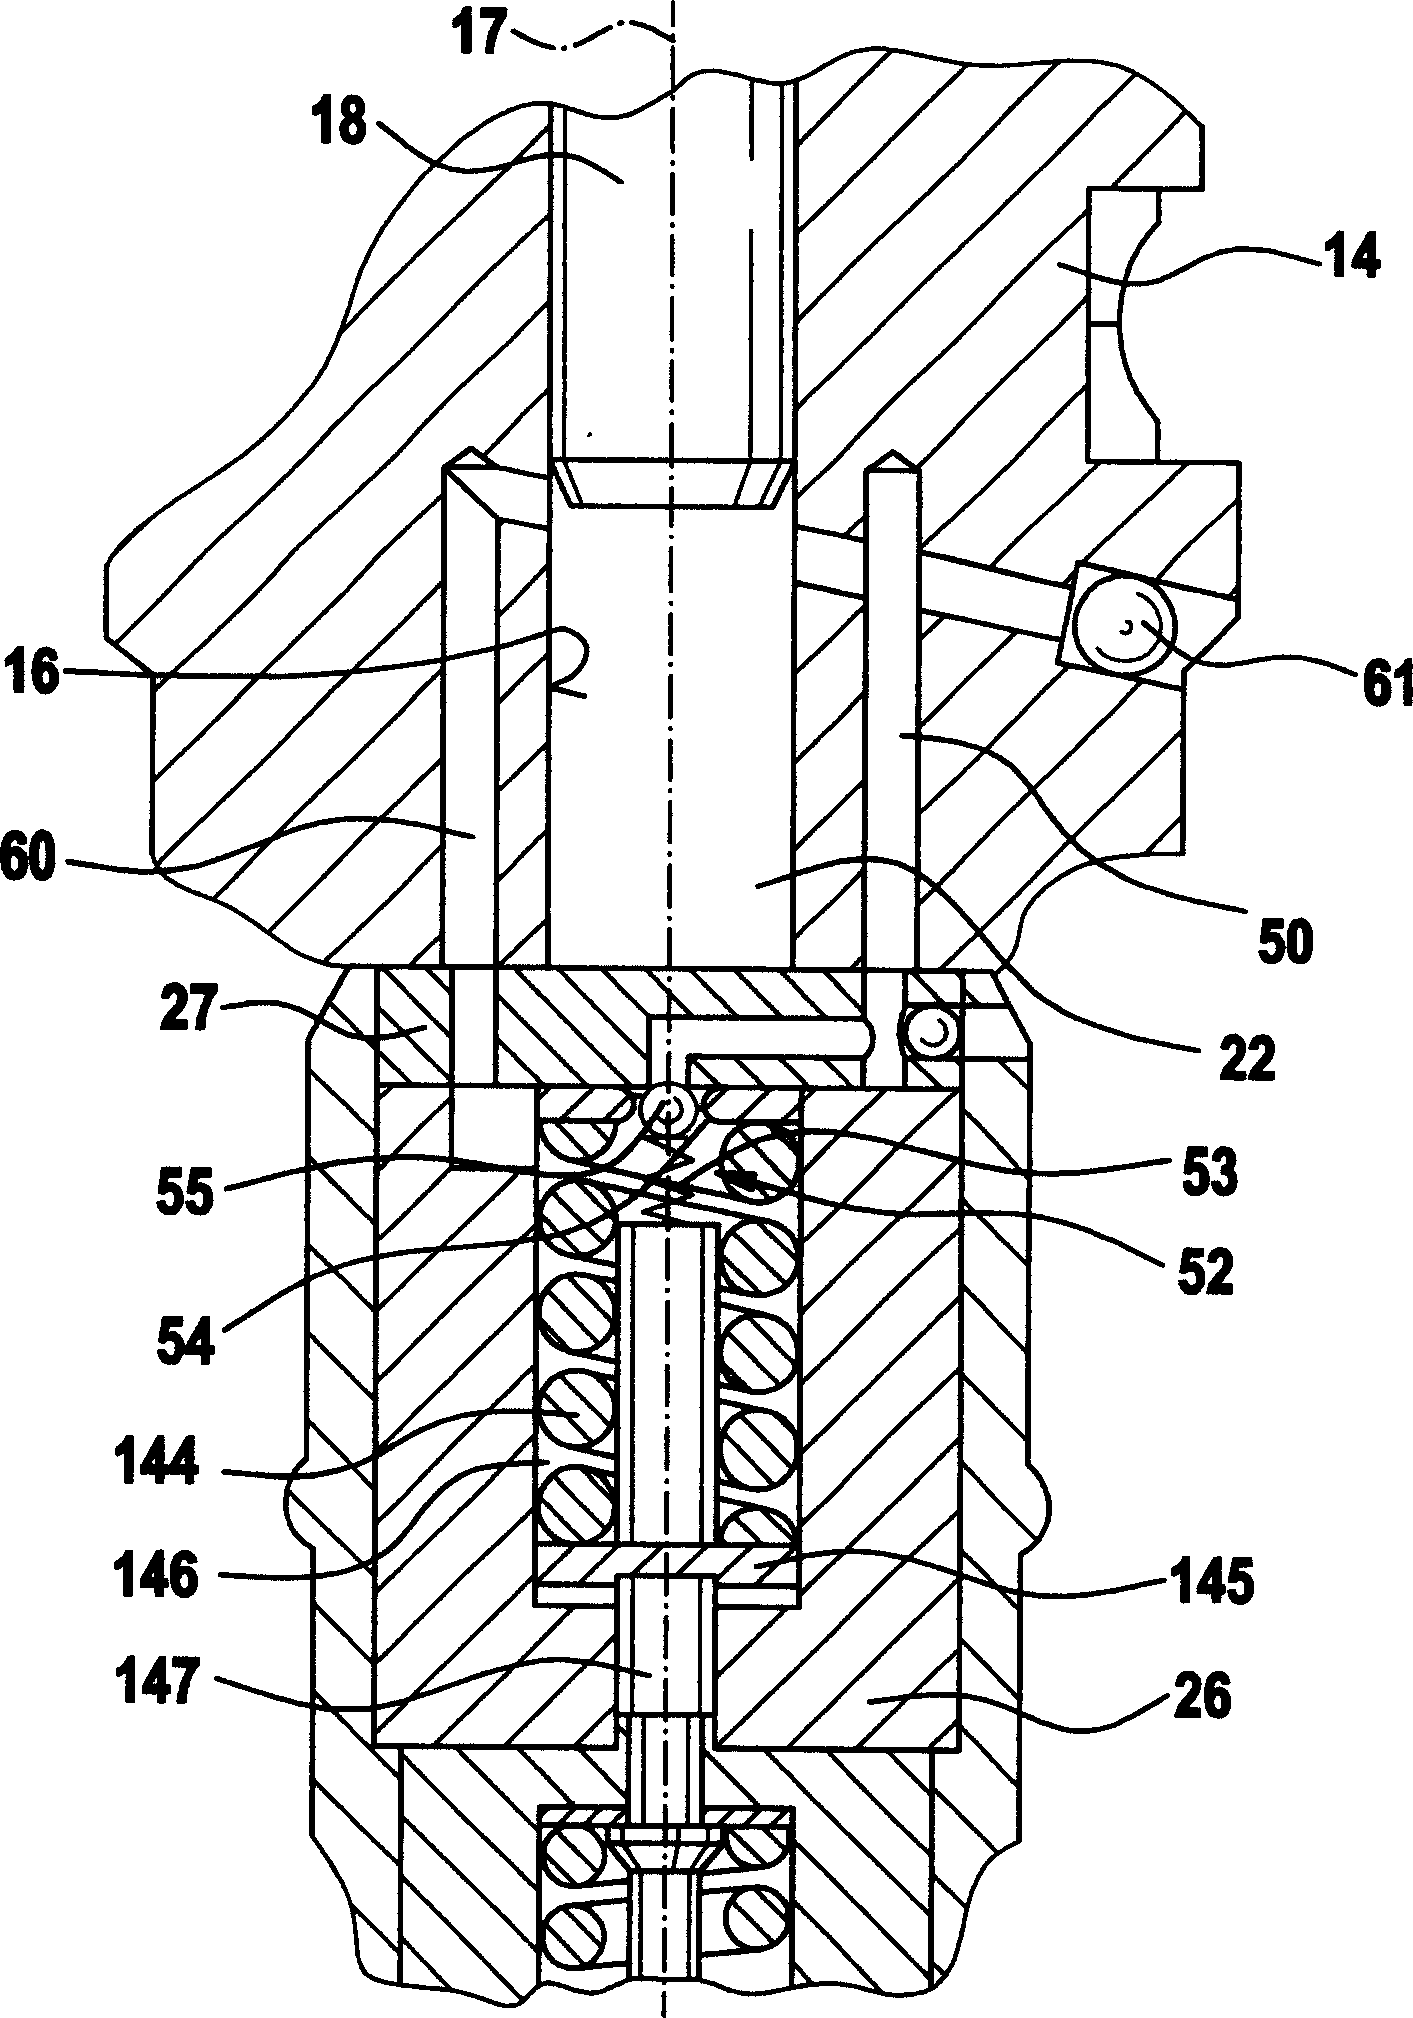 Fuel jetting device used in internal combustion engine